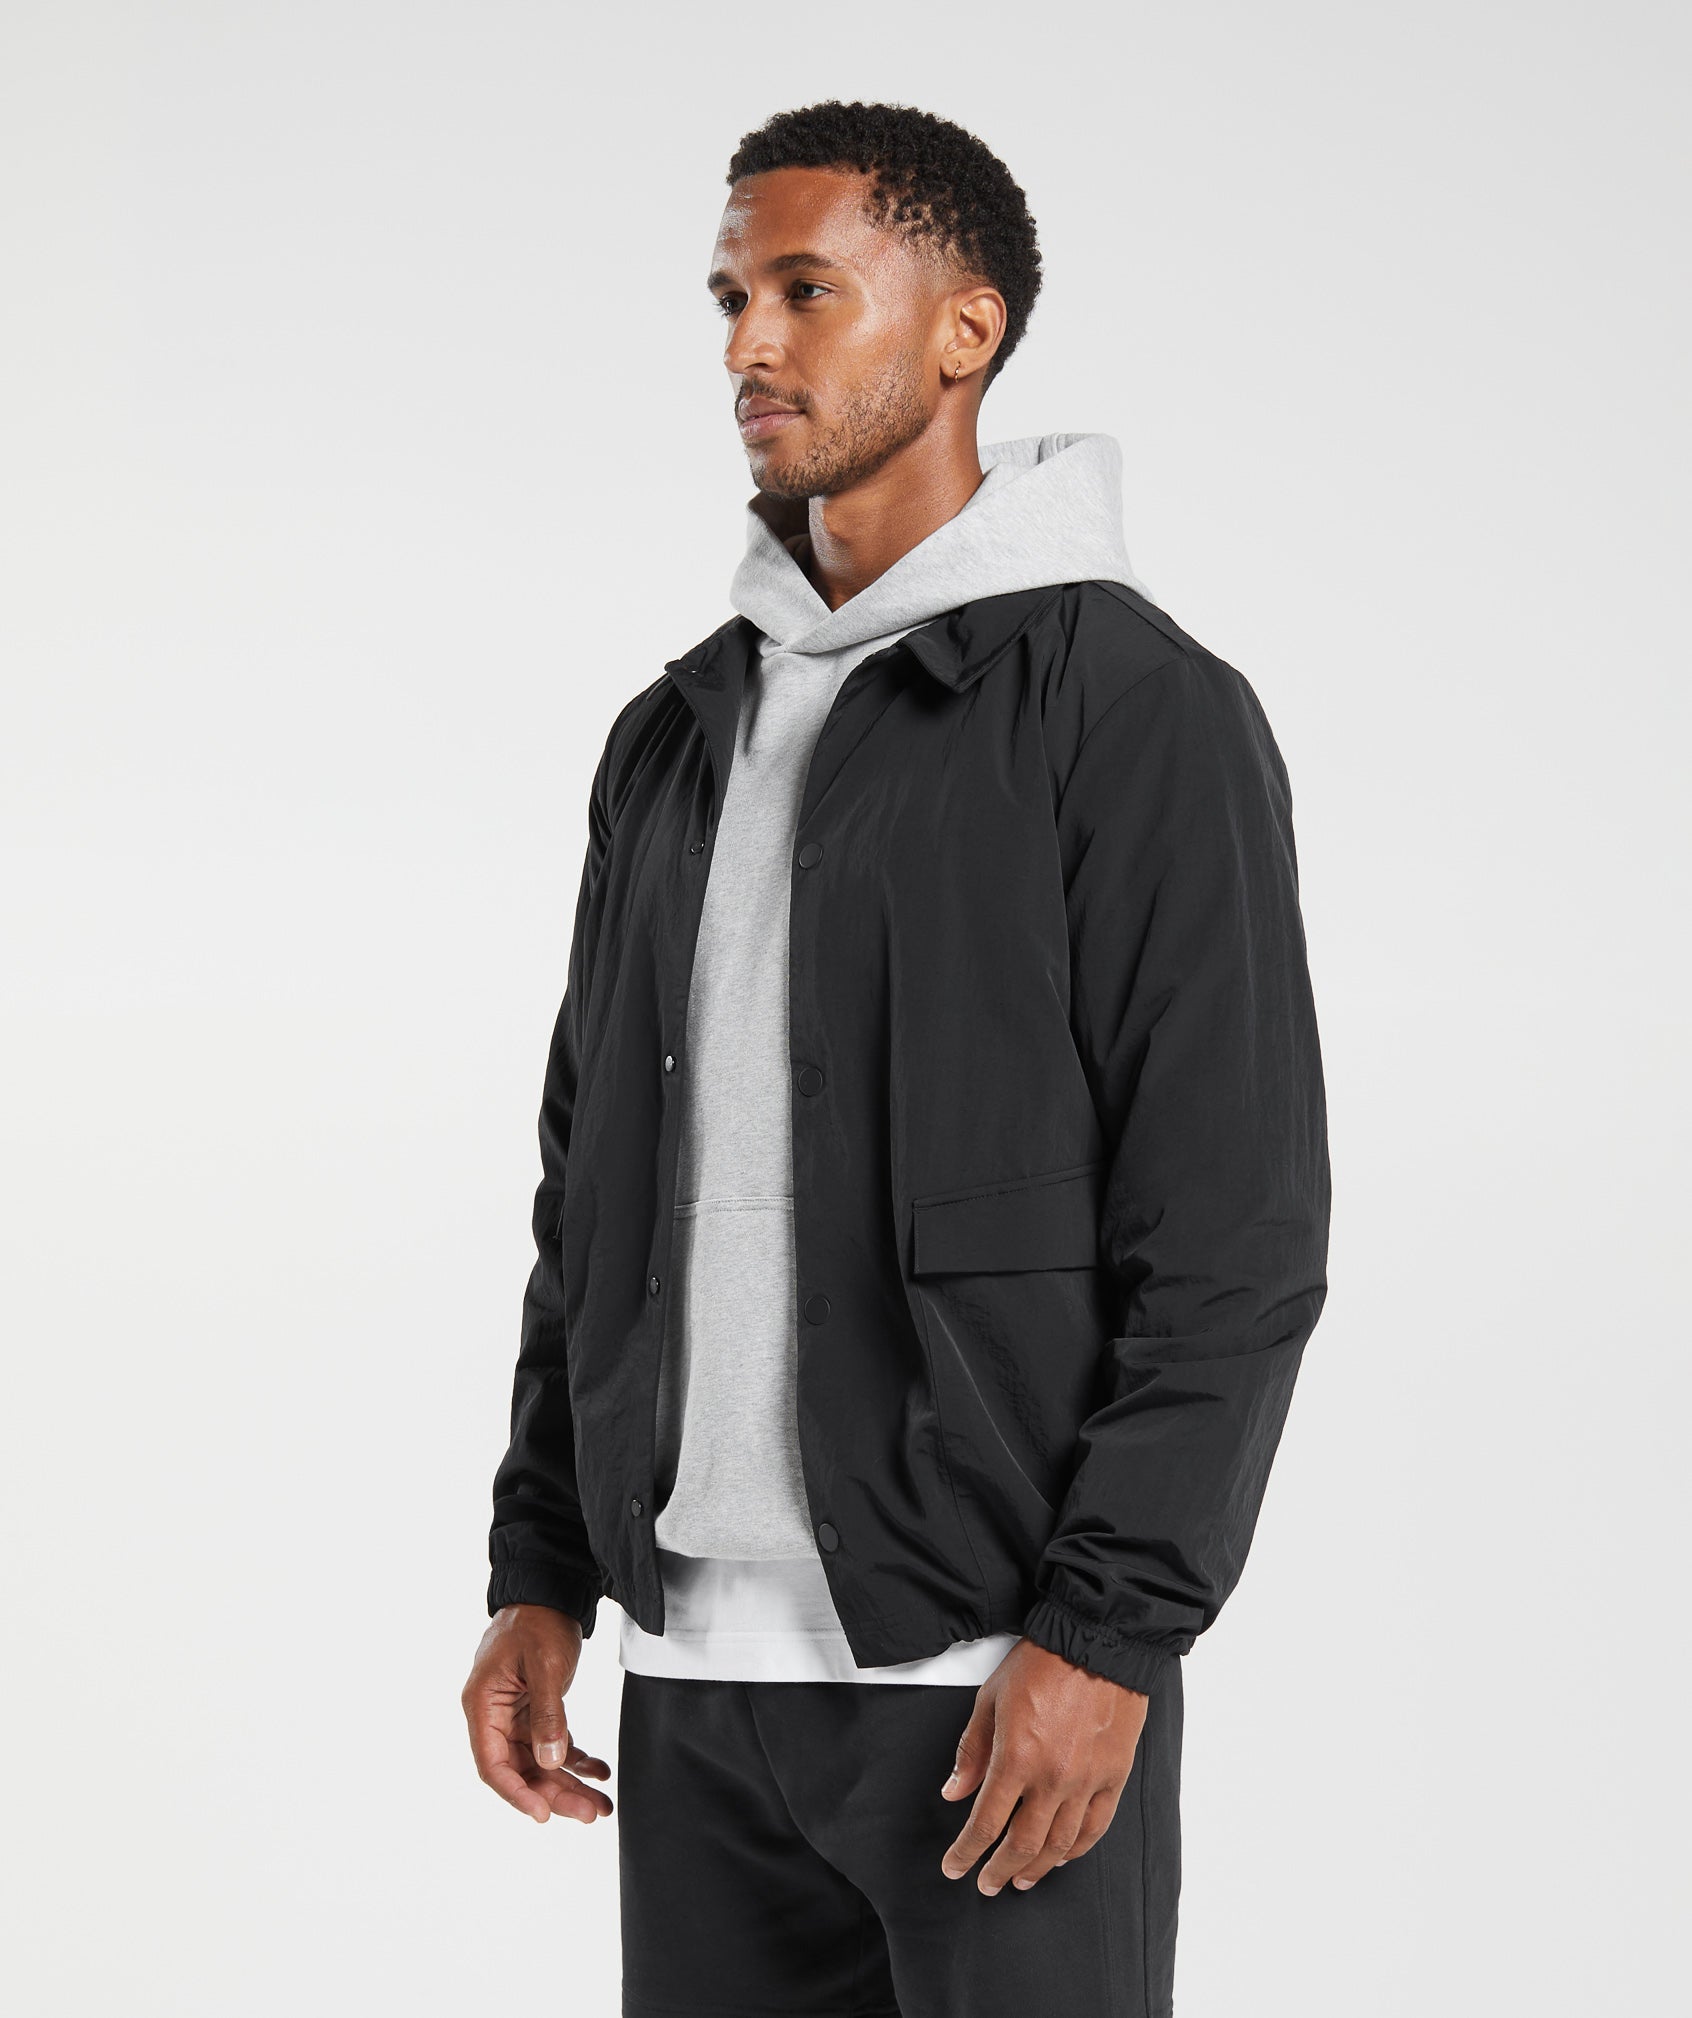 Rest Day Commute Jacket in Black - view 3